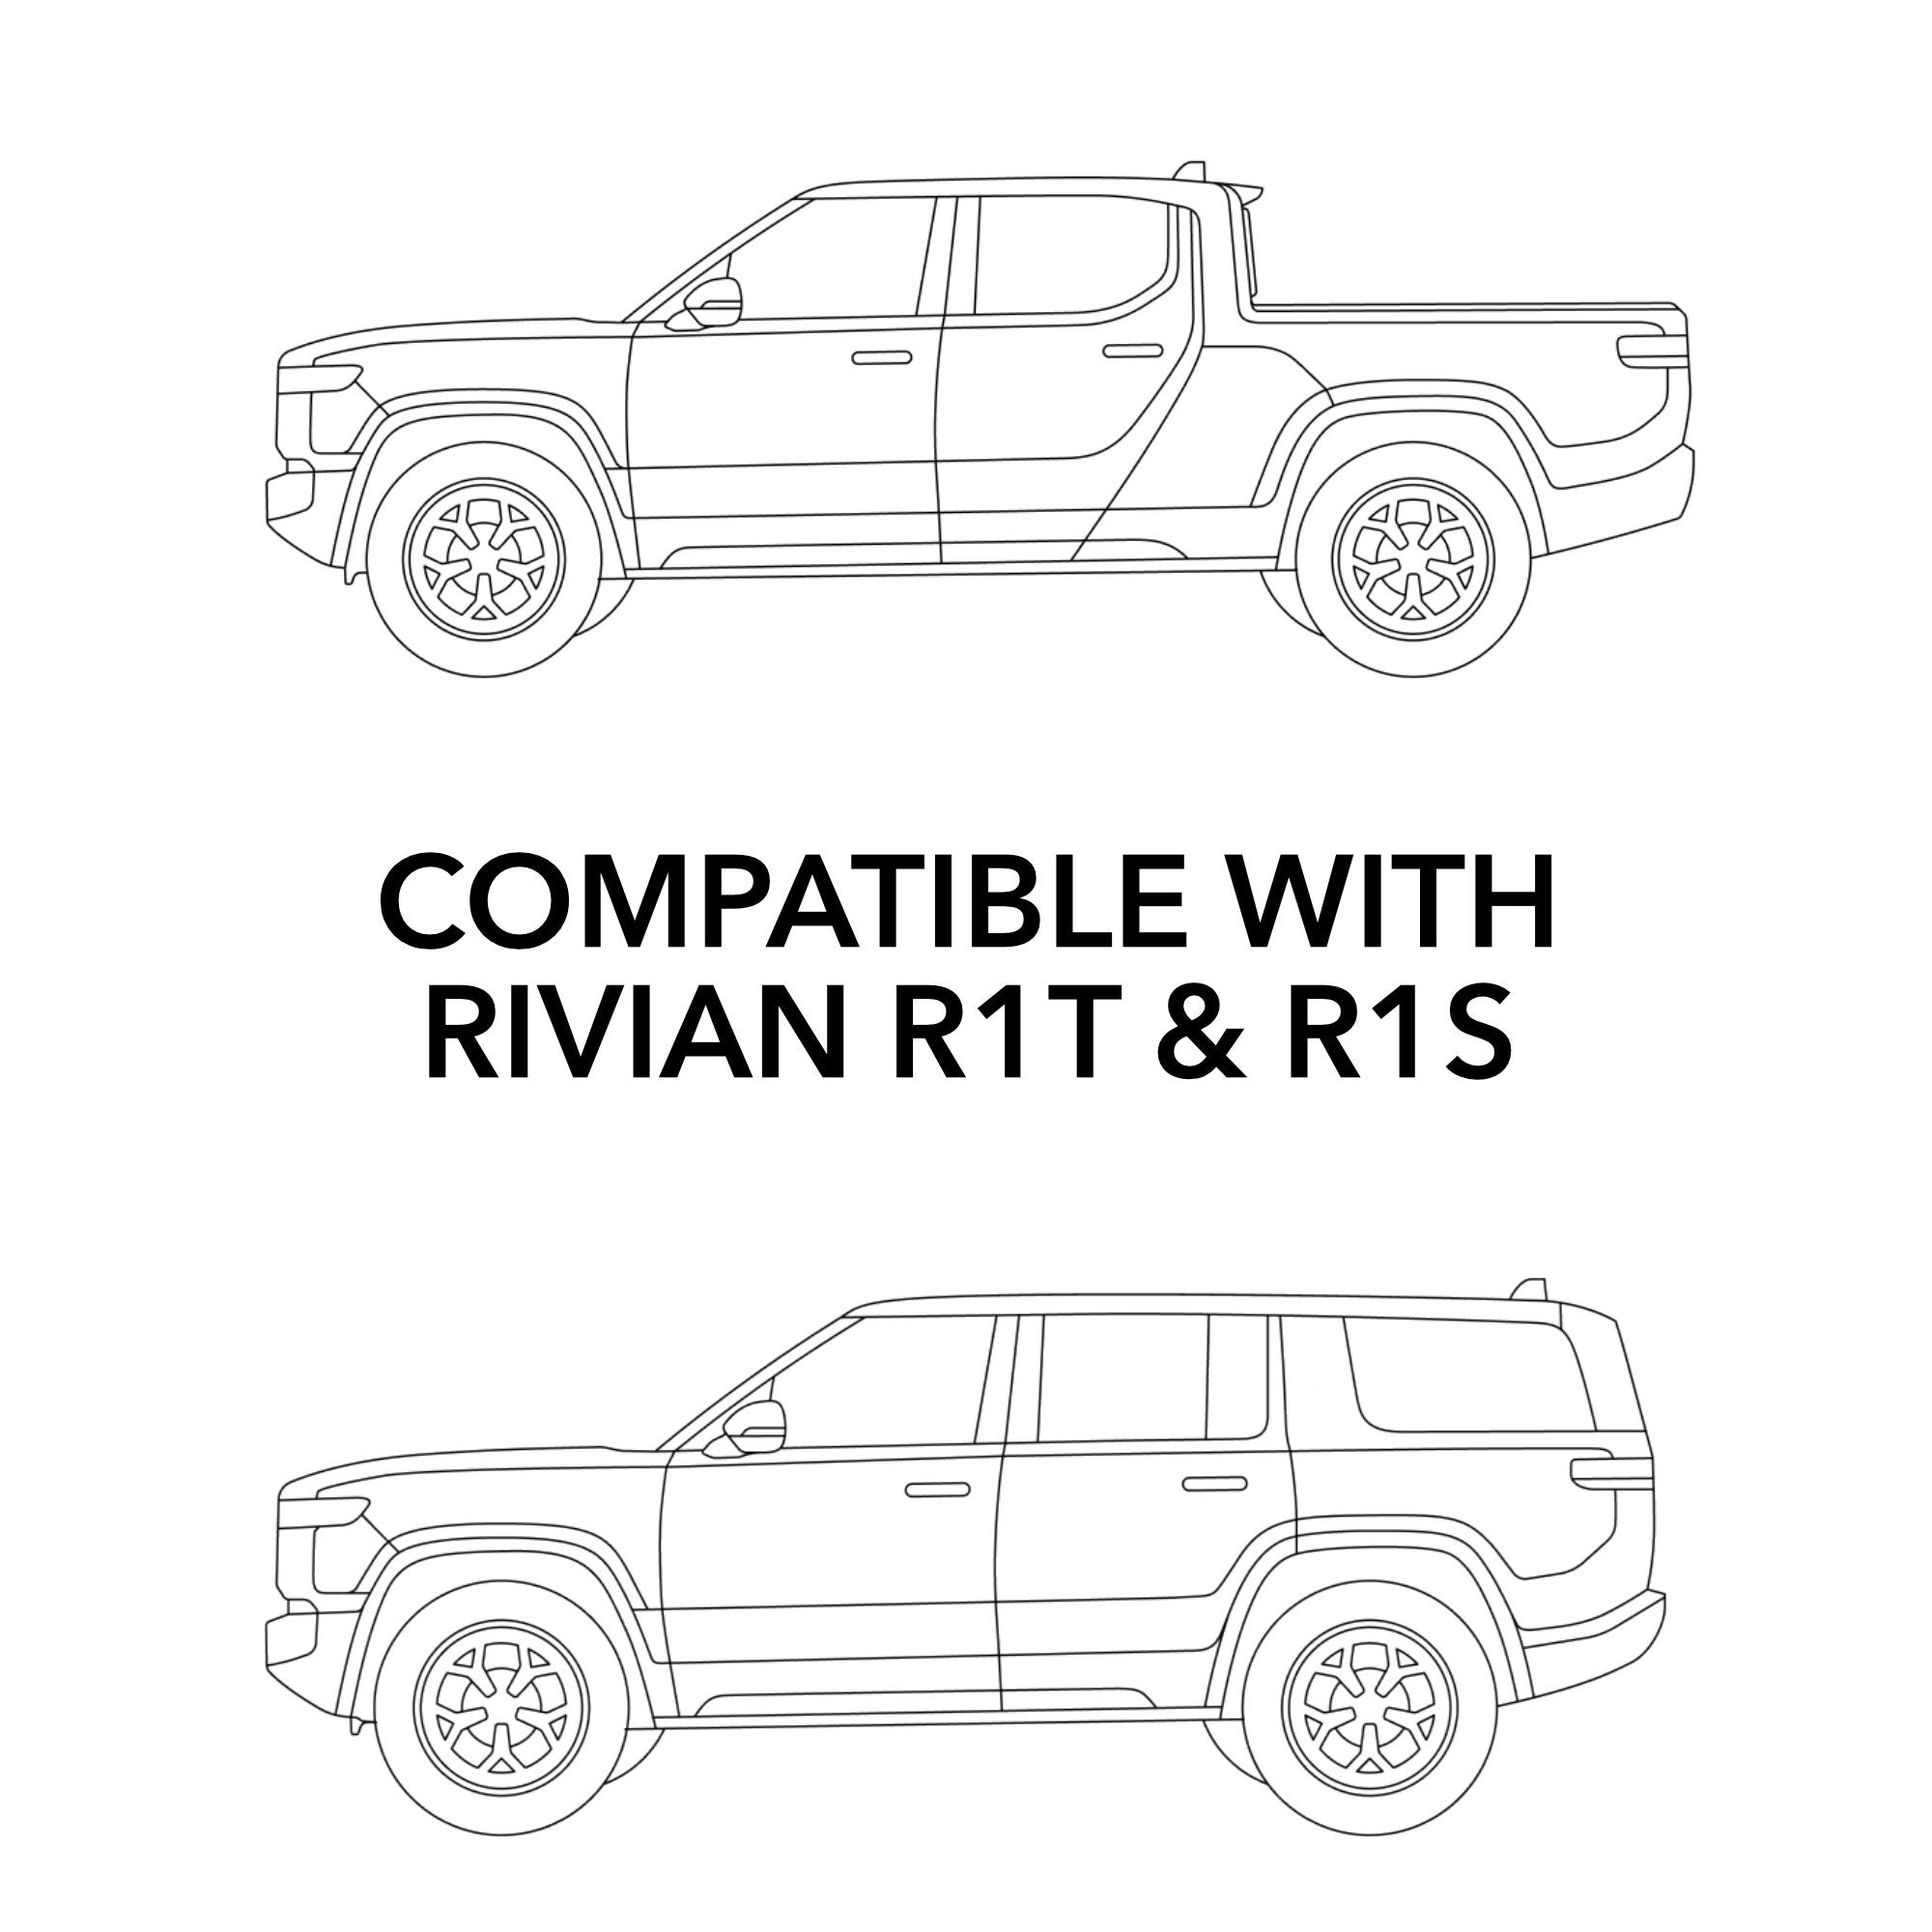 Hood Clear Protection Film (PPF) for Rivian R1T/R1S – TWRAPS